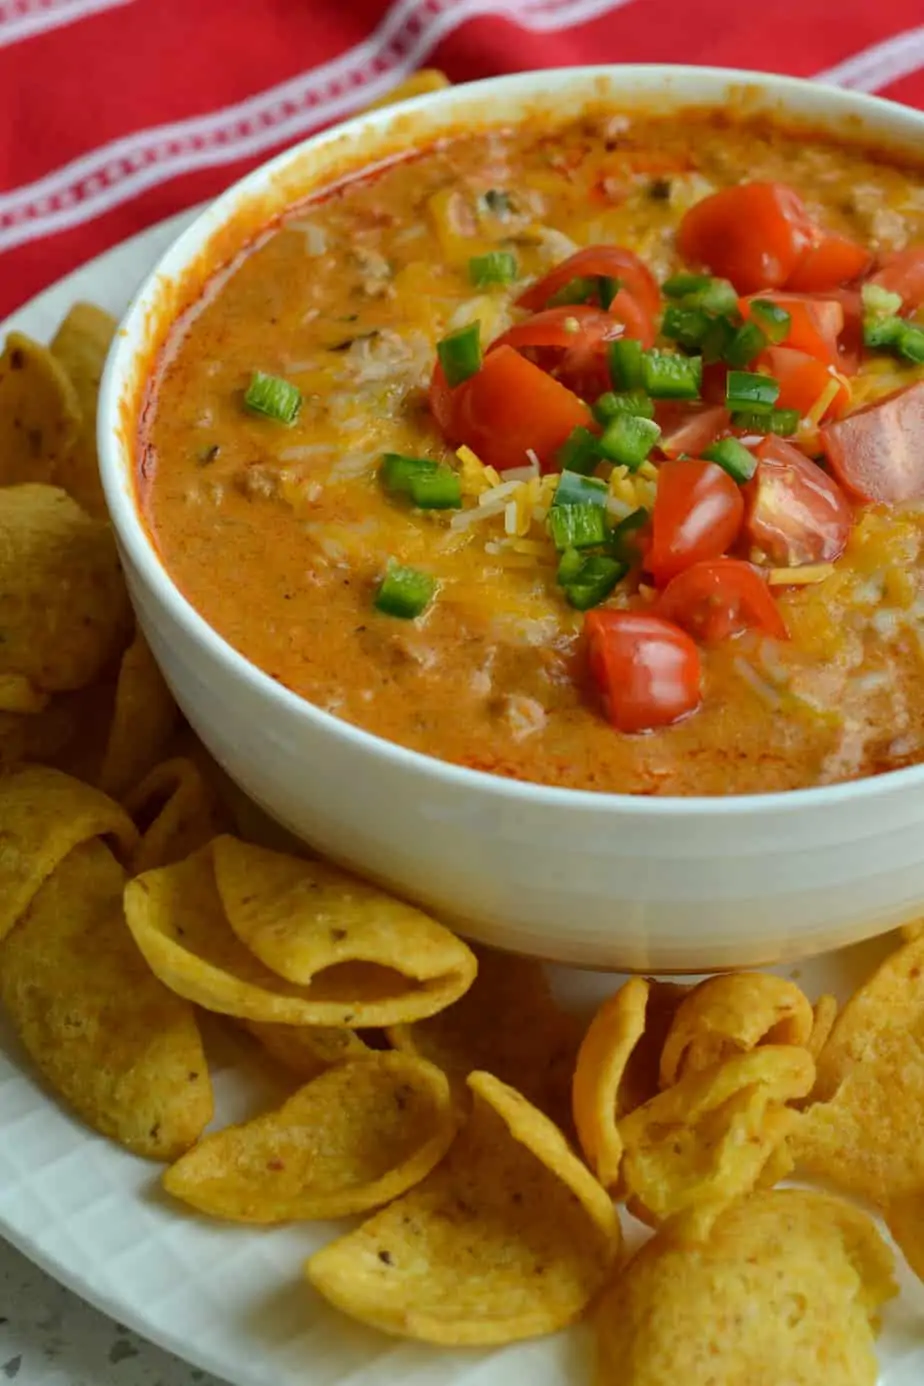 Chili Cheese Dip is a blend of thick chili. salsa style tomatoes, cream cheese, hot sauce, cheddar and Pepper Jack cheese. 